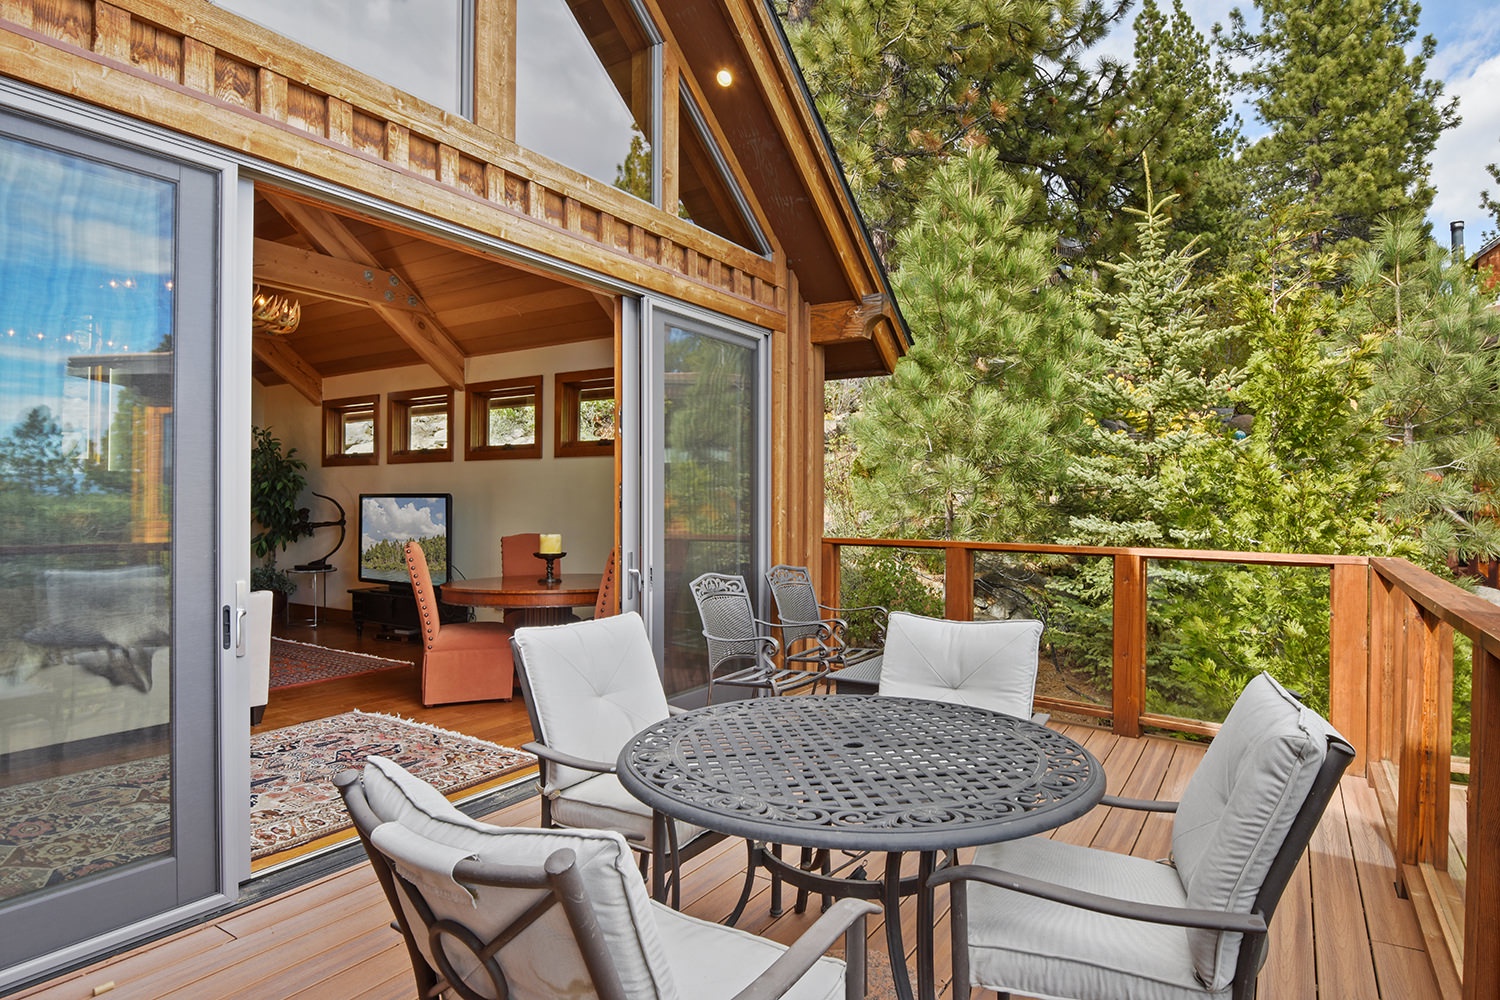 Outdoor deck with gas BBQ grill and outdoor seating